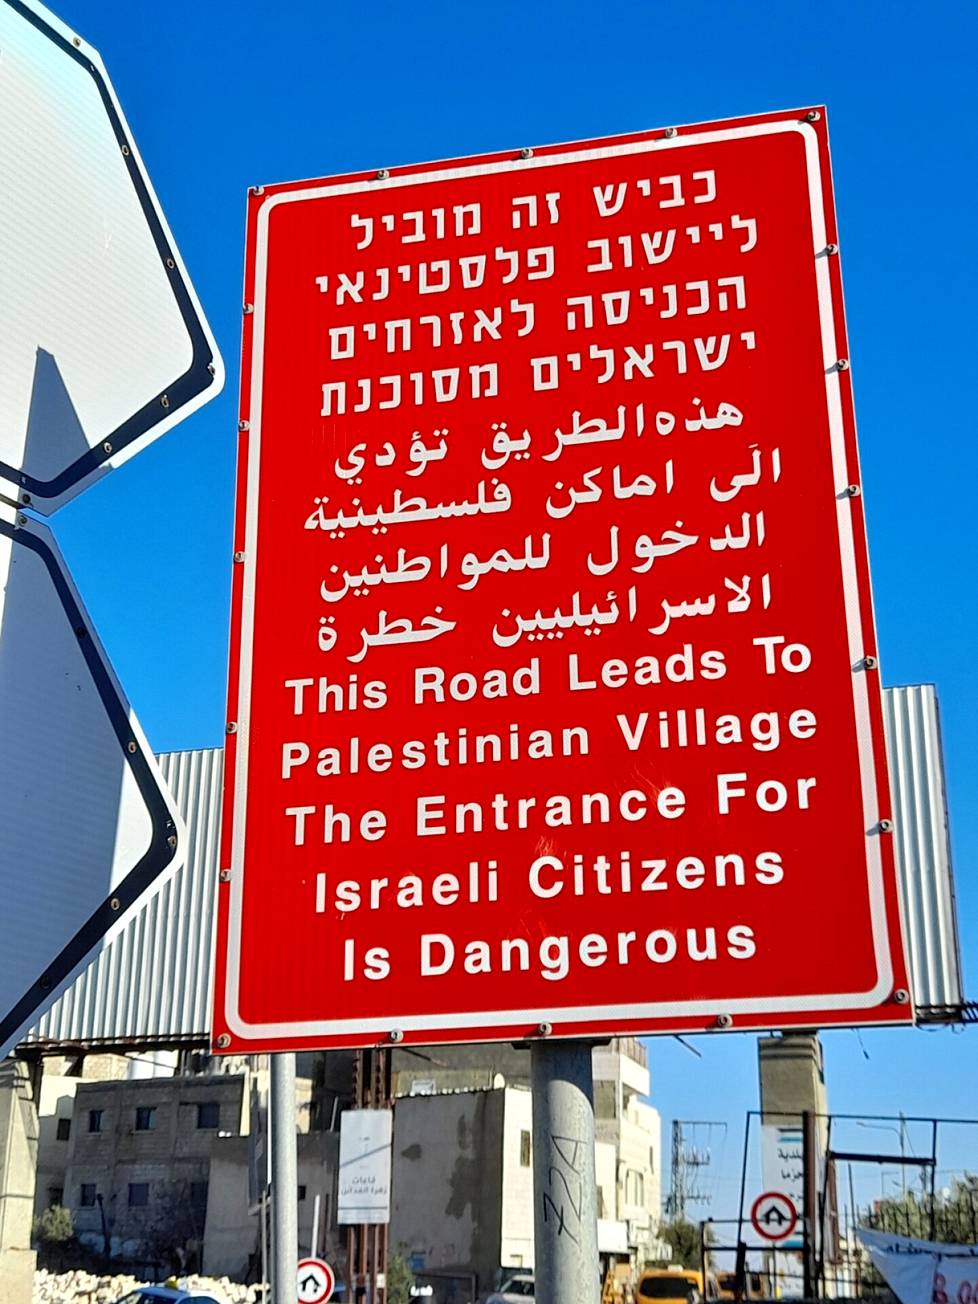 A sign warns Israelis not to go to a Palestinian village.